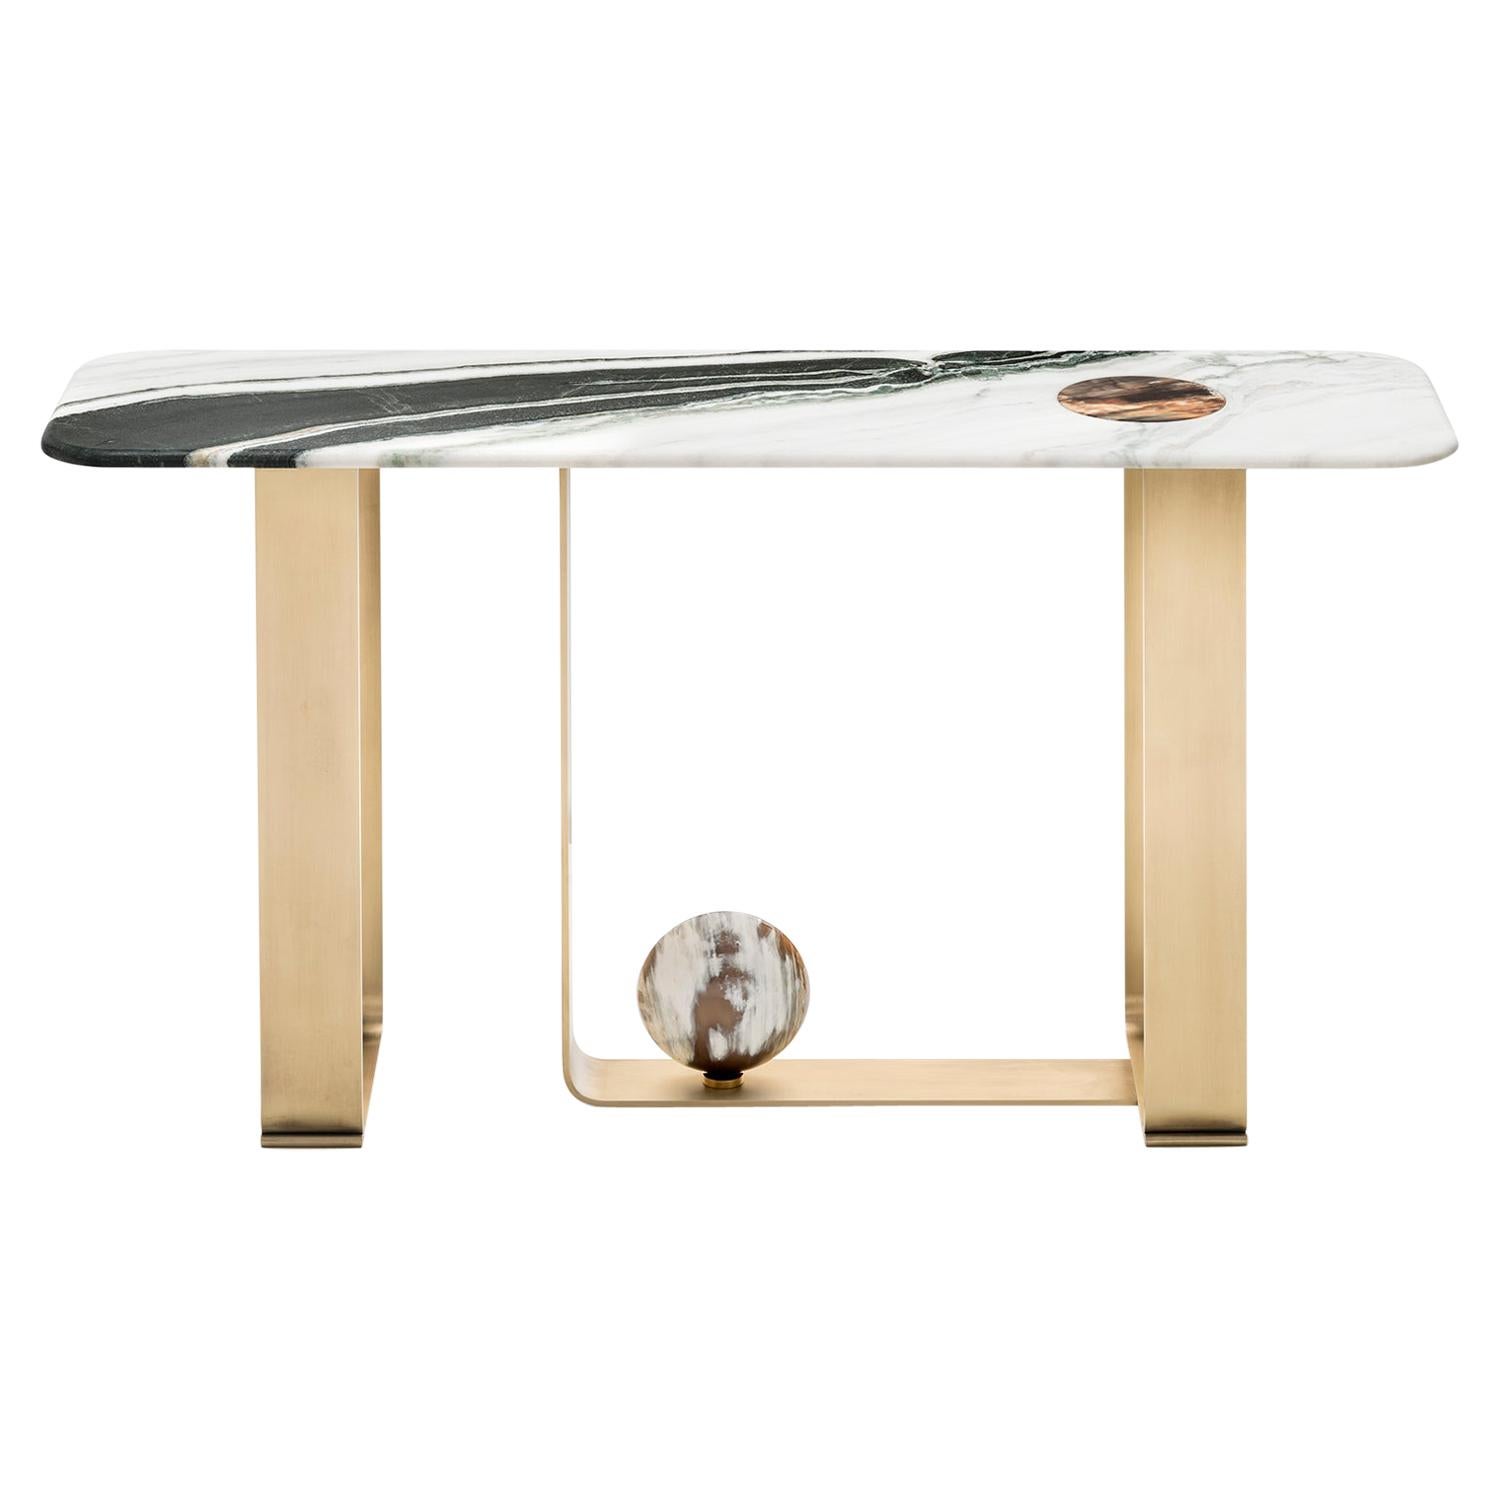 Designed by nature and perfected by expert master craftsmen, our Minerva console table will make a superb addition to a hallway or under a grand mirror. Featuring an elegant top in satin Dalmata Marble with an unprecedented marquetry in Corno